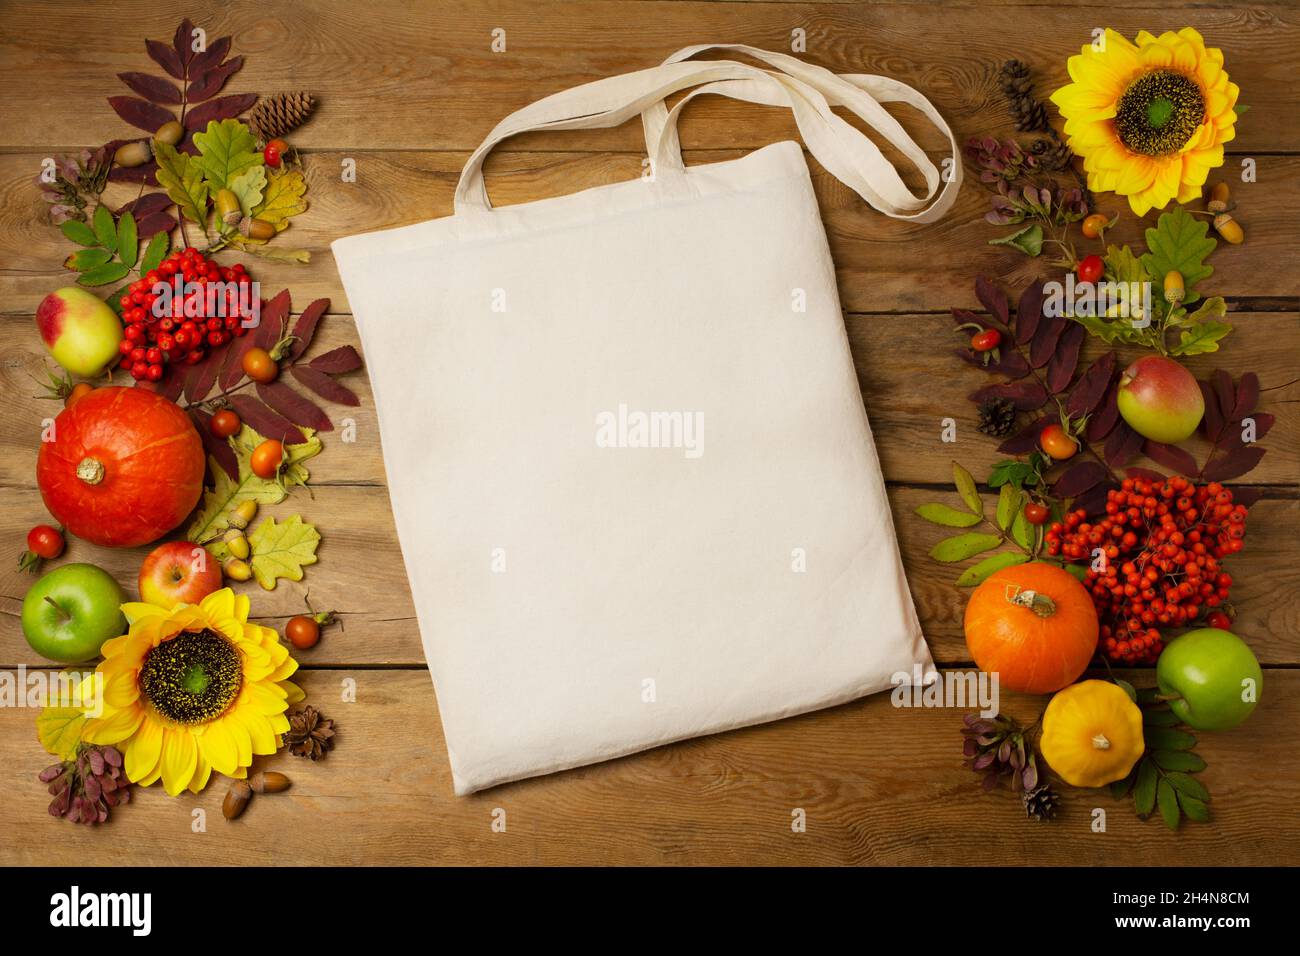 Canvas tote bag mockup with sunflowers, pumpkins and fall leaves. Rustic linen shopper bag mock up for branding presentation Stock Photo